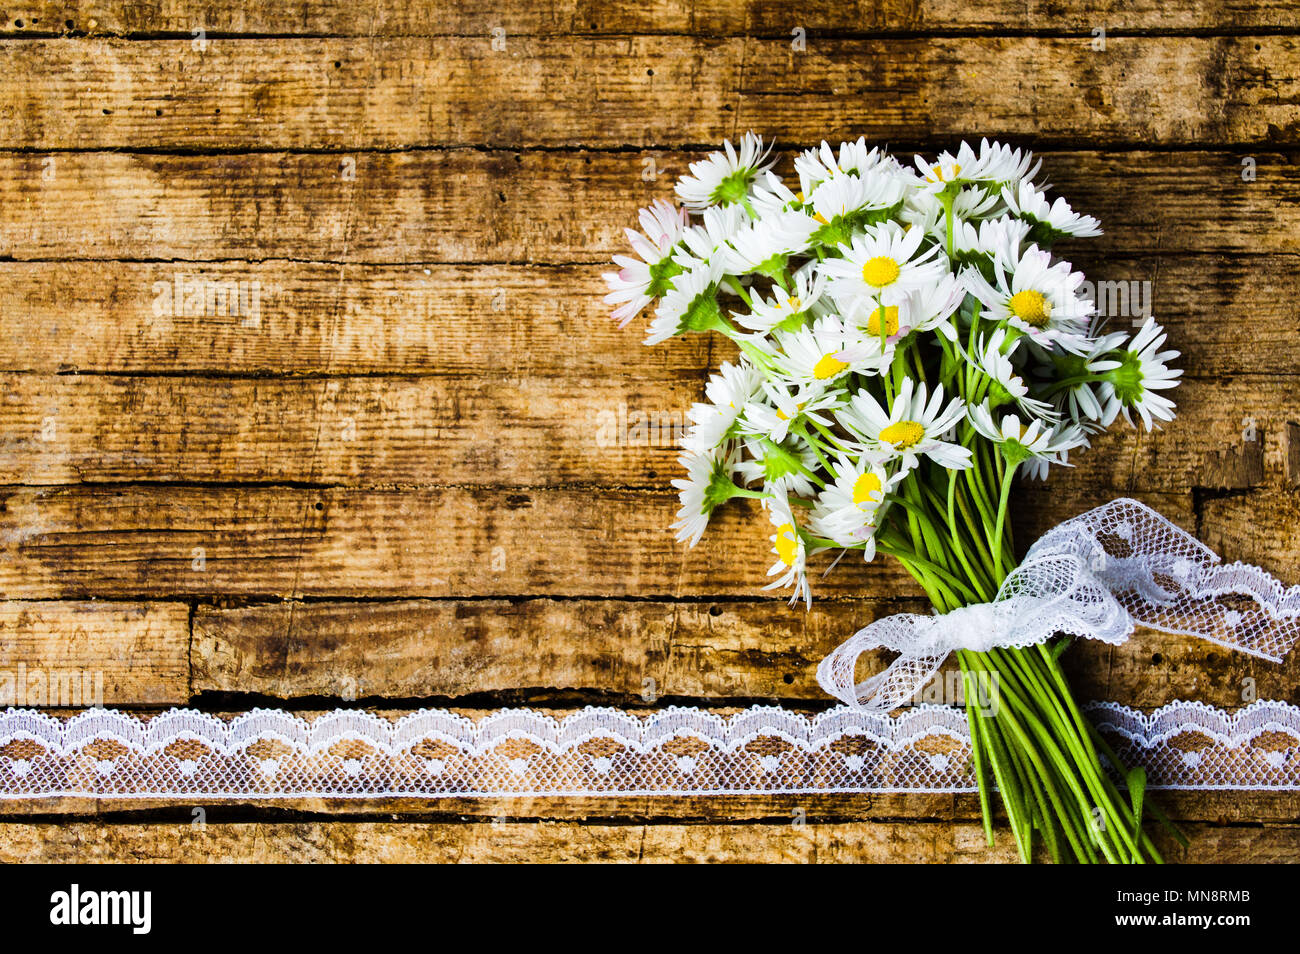 Daisy flowers bouquet on a wooden table with copy space Stock Photo